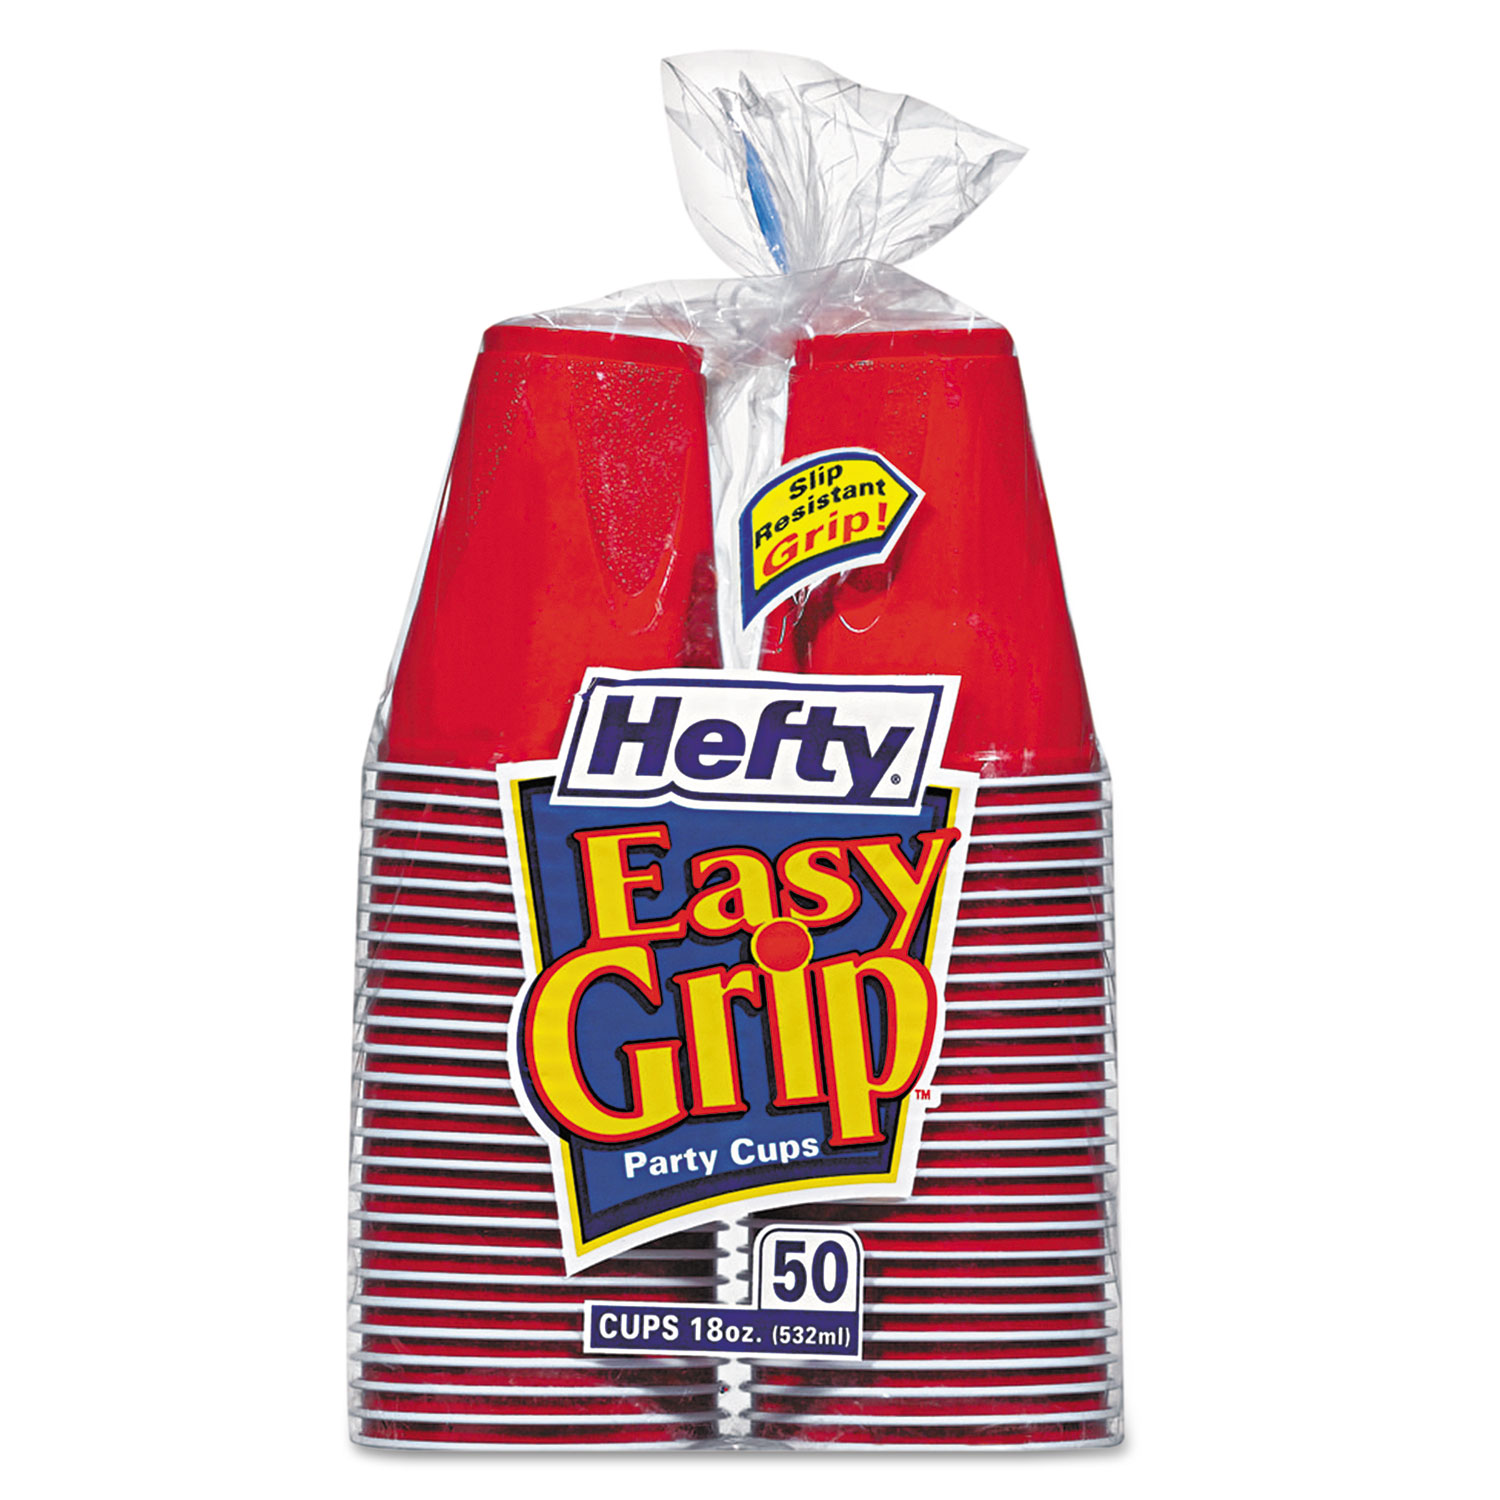  Hefty C21999CT Easy Grip Disposable Plastic Party Cups, 18 oz, Red, 50/Pack, 12 Packs/Carton (RFPC21999CT) 